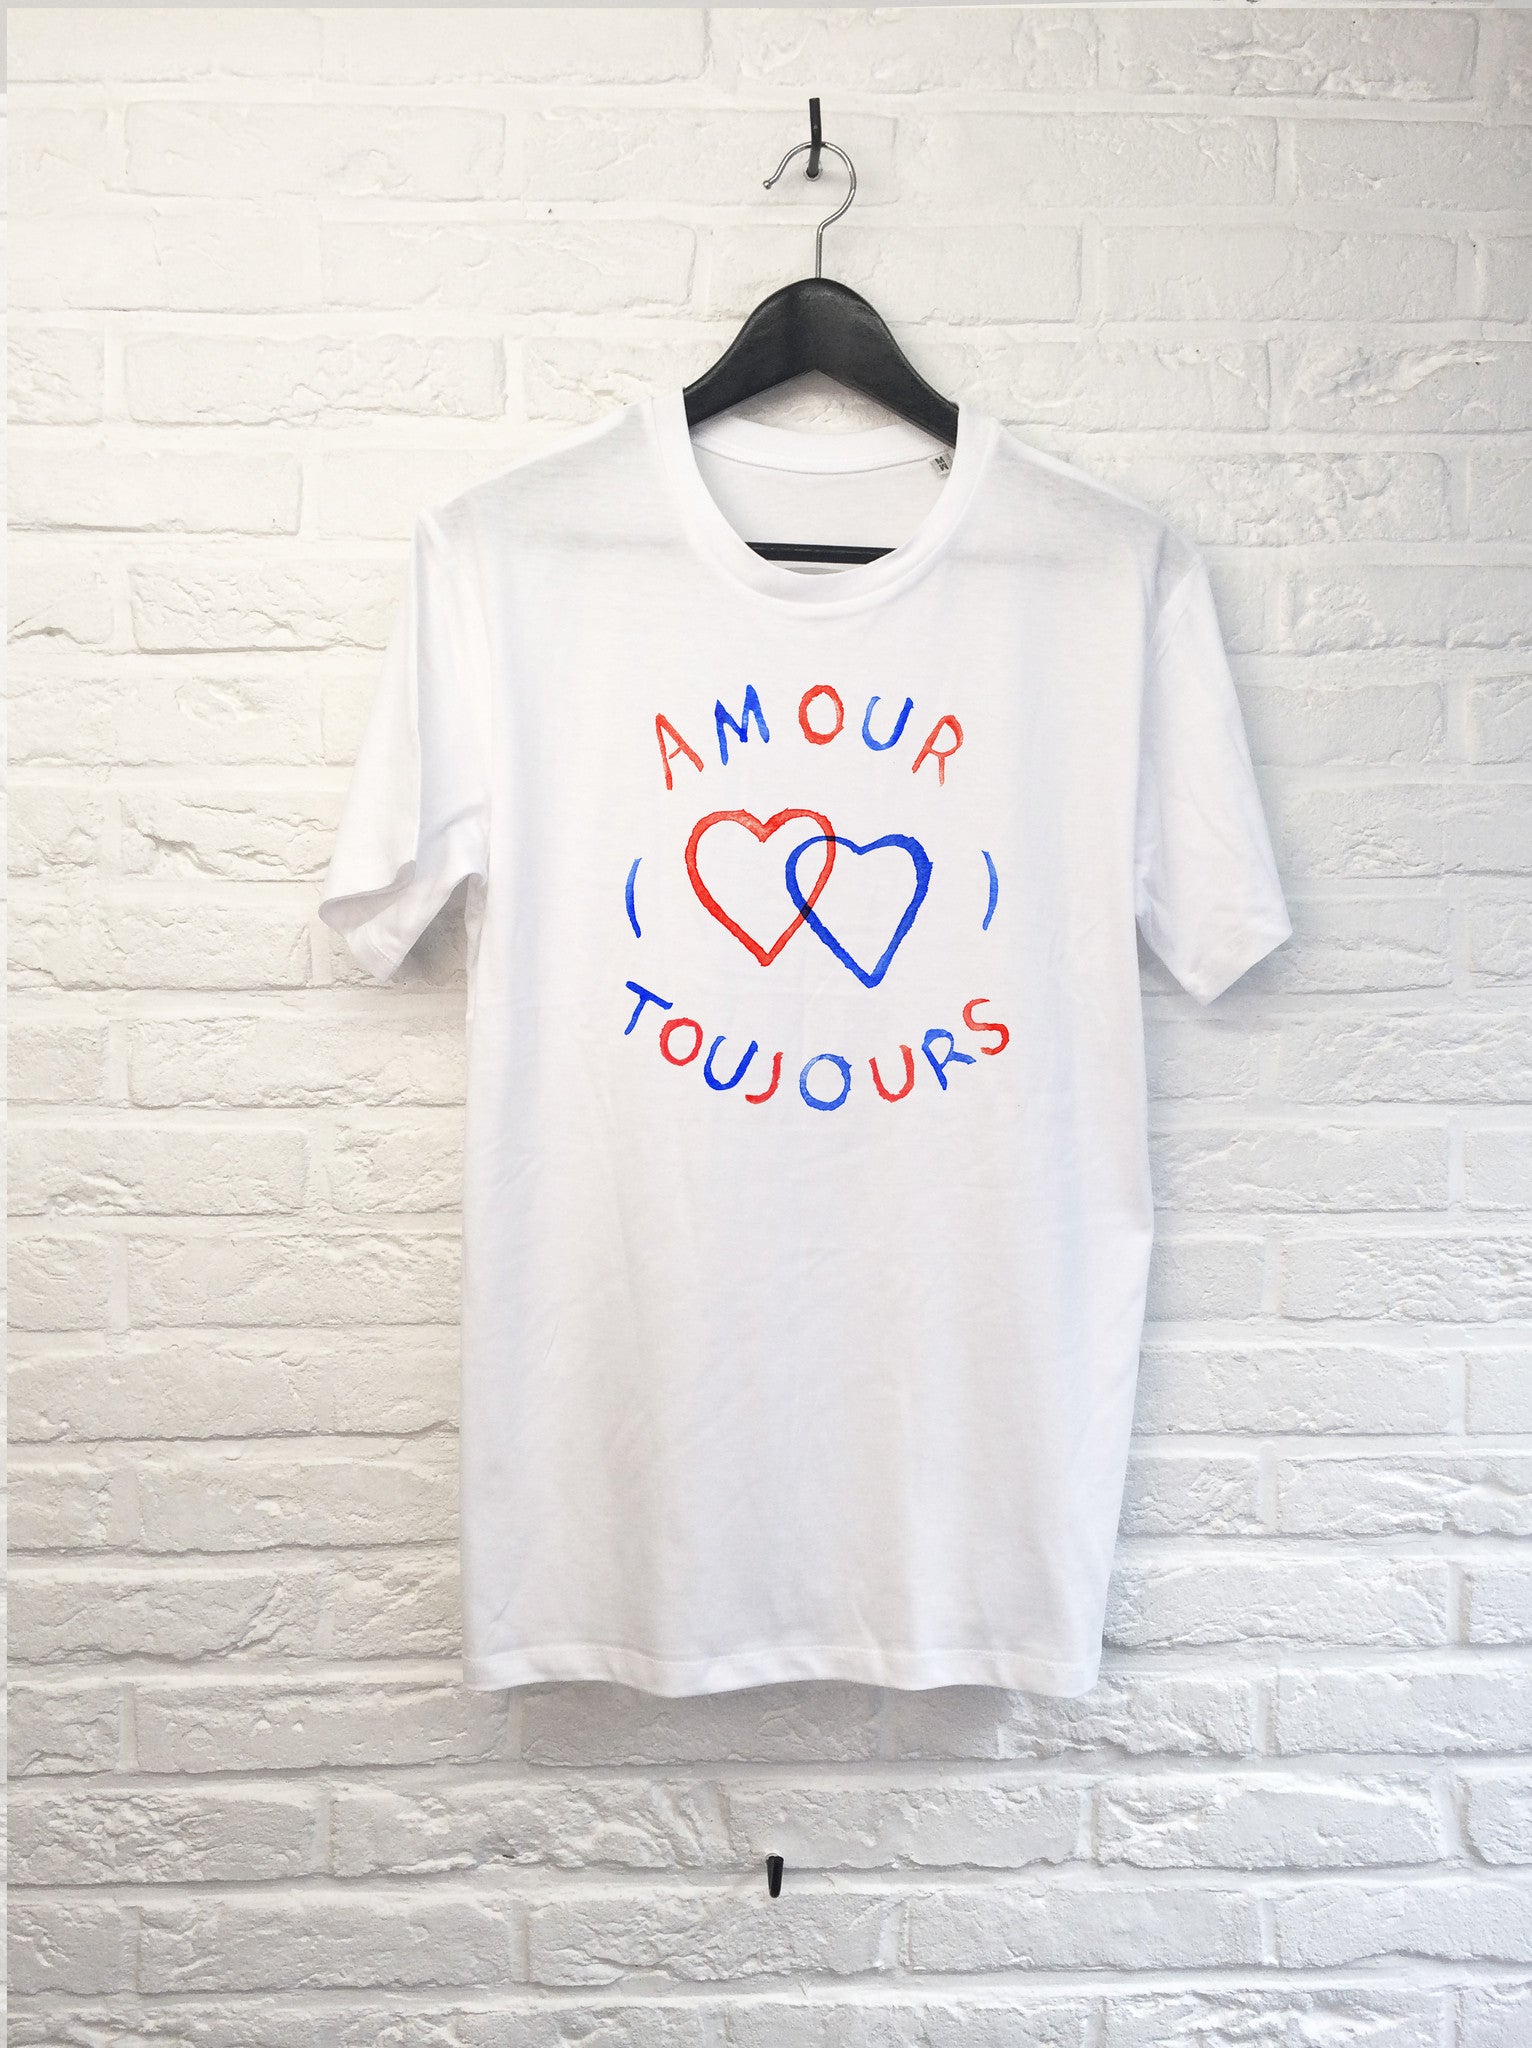 TH Gallery - Amour Toujours-T shirt-Atelier Amelot